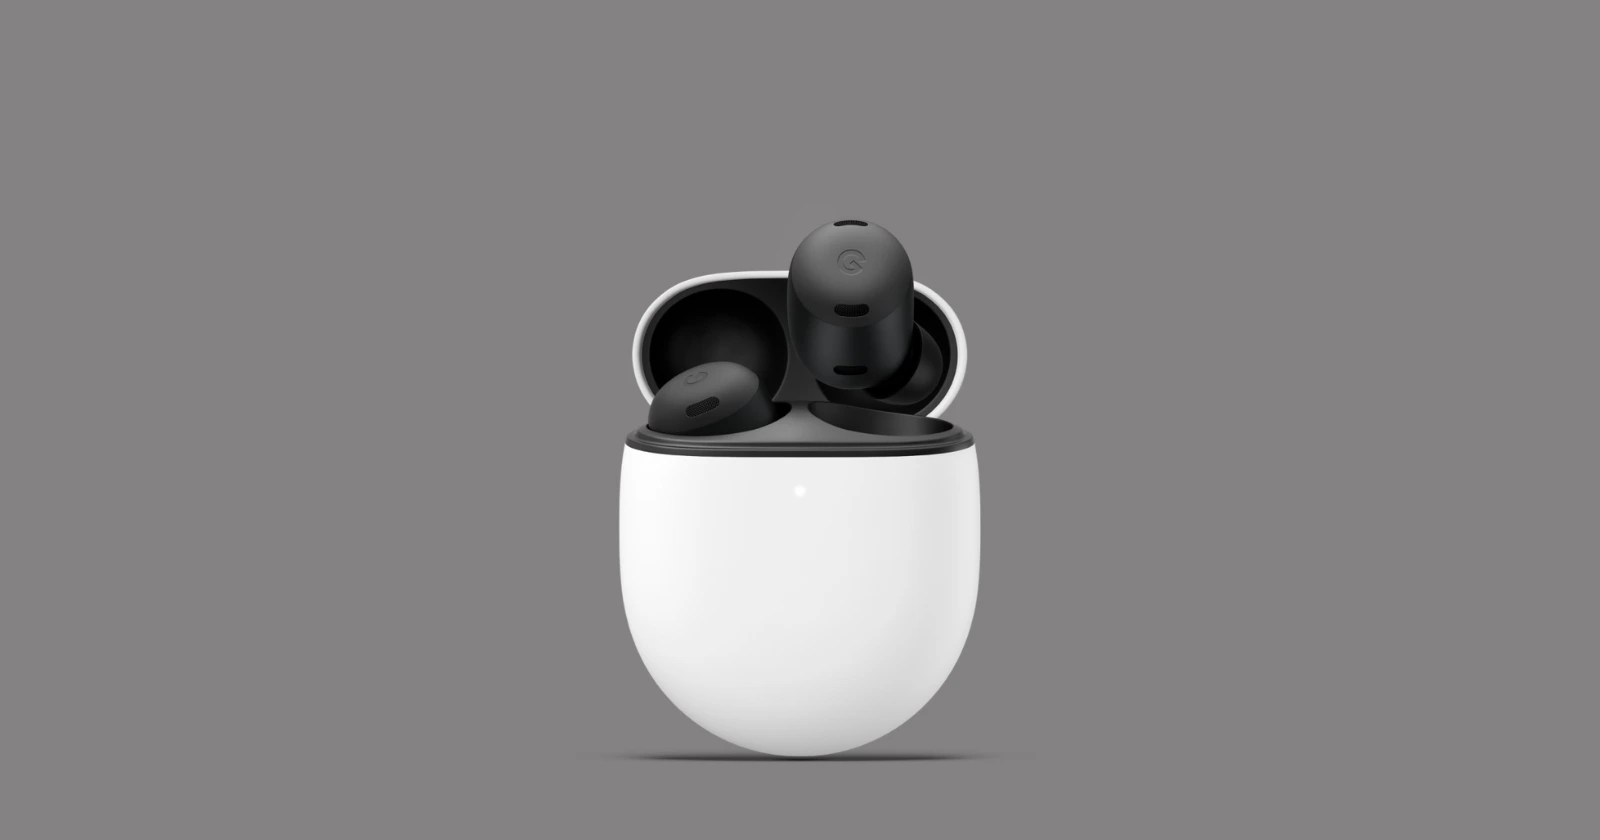 You can save NT$1,500 ($48) on Google Pixel Buds Pro from Google Store Taiwan